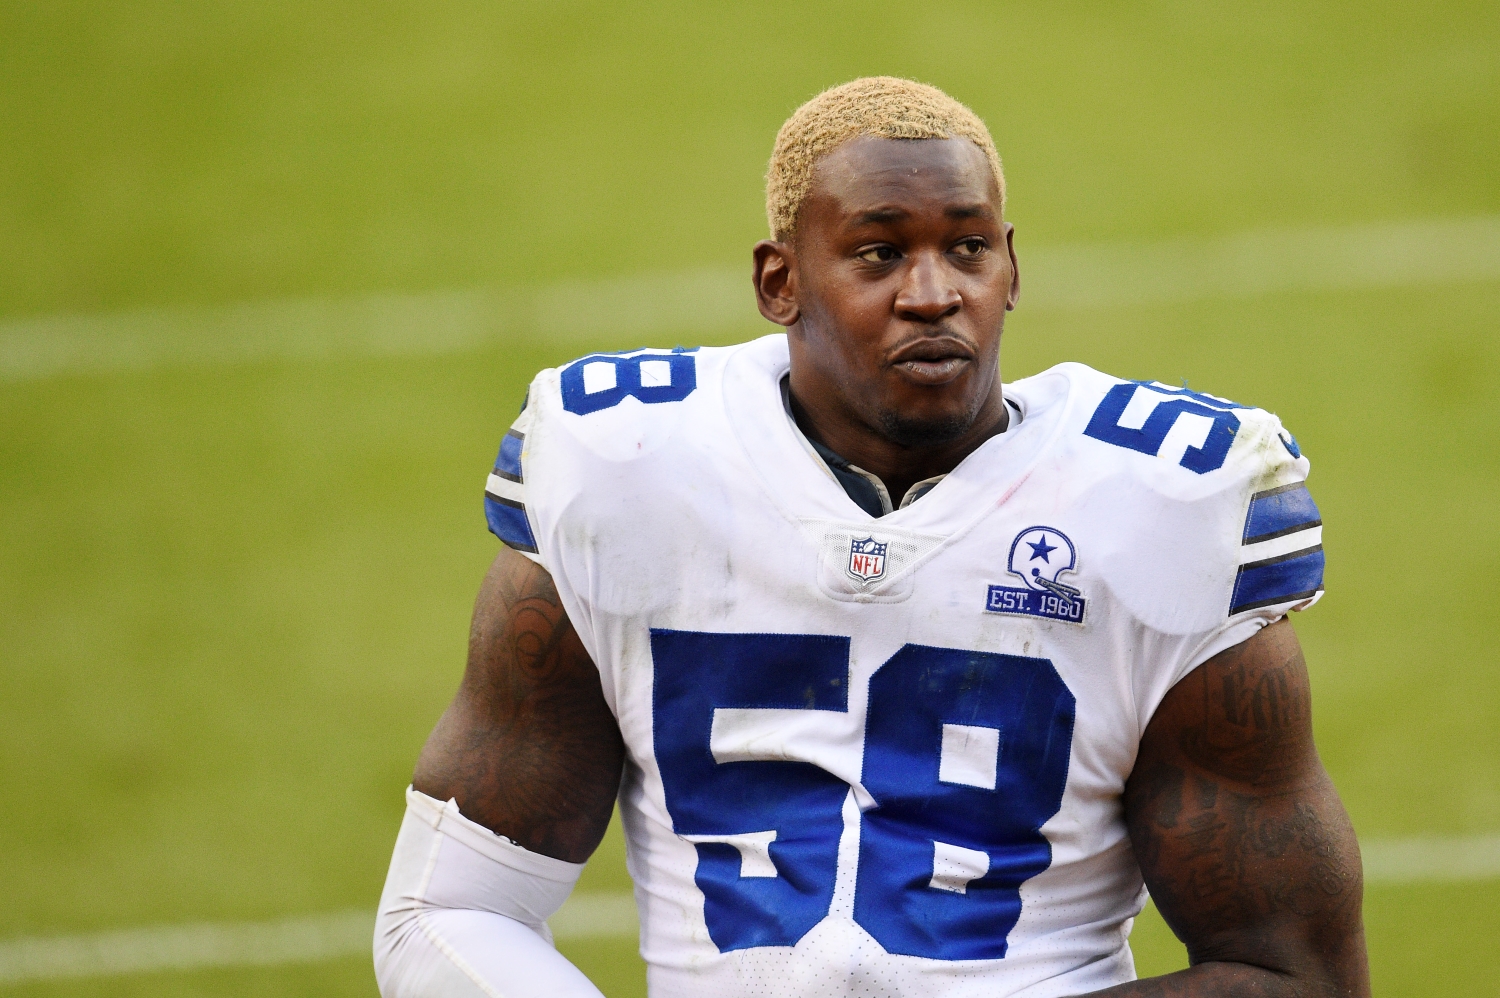 It sure sounds like Jerry Jones plans on having Aldon Smith remain a member of the Cowboys for years to come.